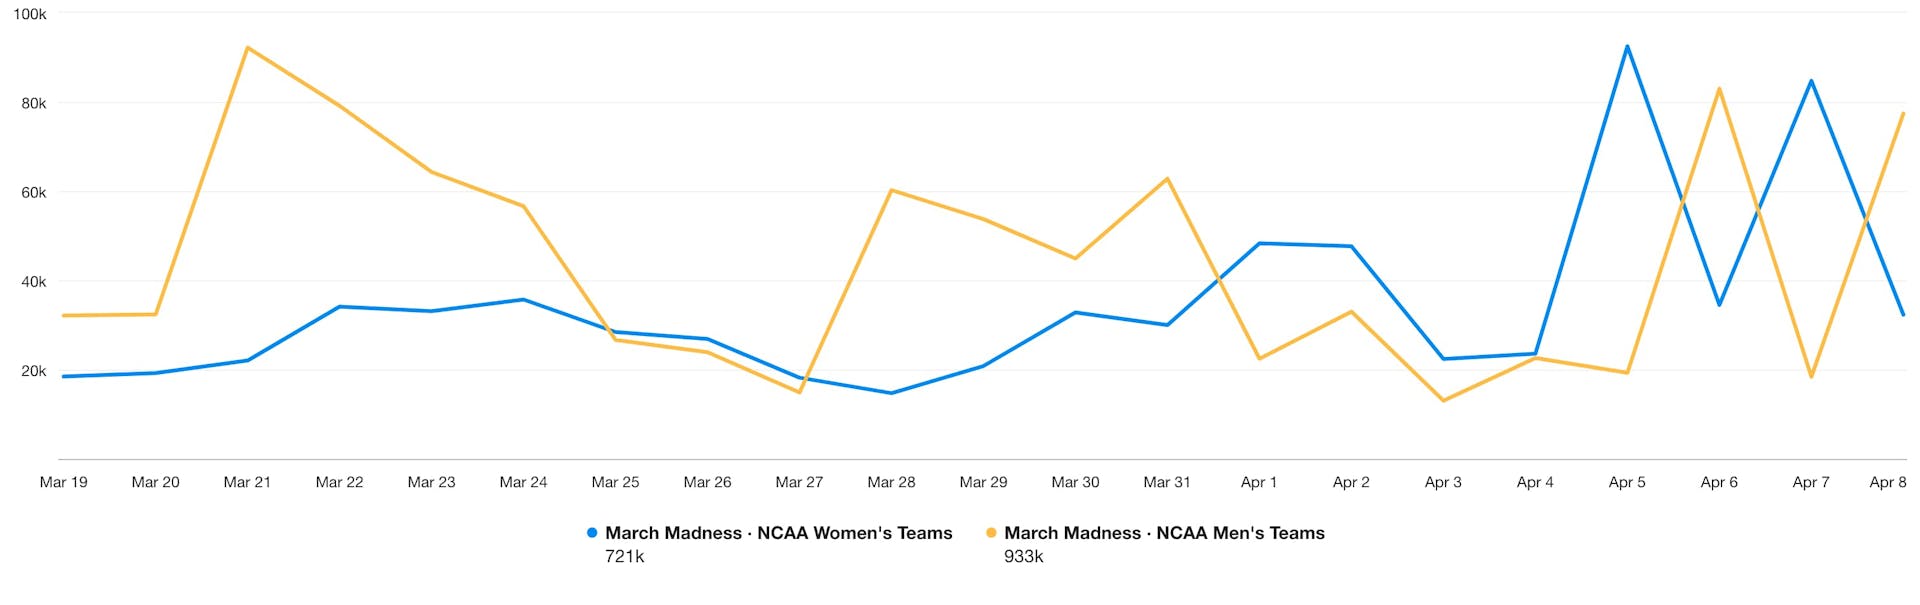 A line chart showing mentions of the women's tournament versus those of the men's tournament from March 19 to April 8.